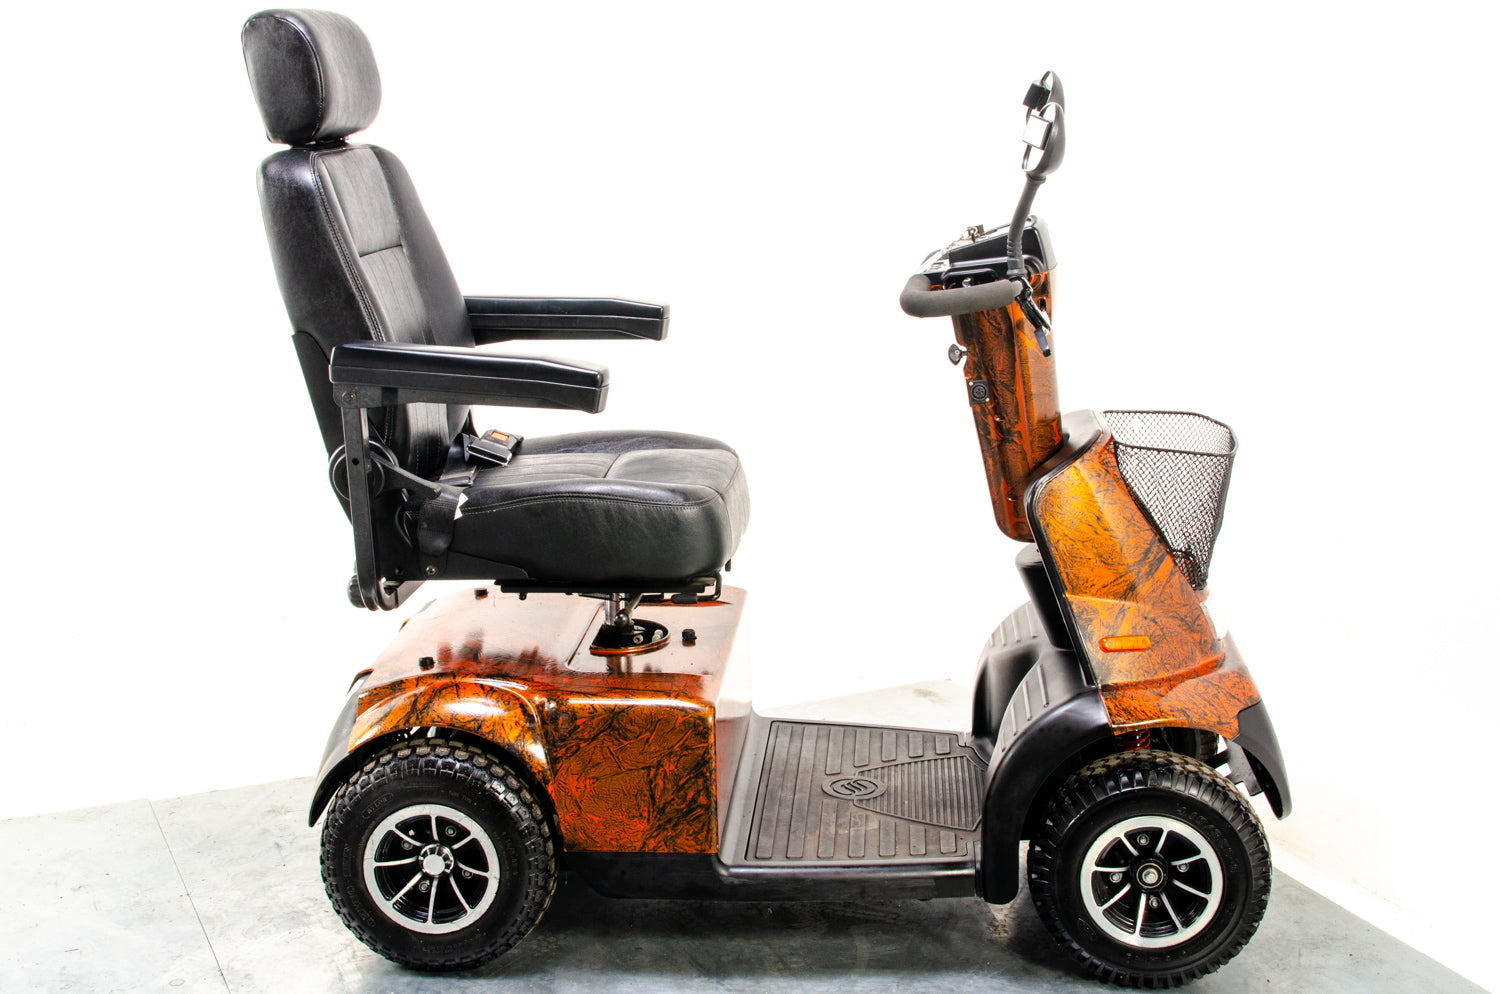 TGA Breeze Midi 4 All-Terrain Off-Road Used Electric Mobility Scooter 8mph Road Suspension